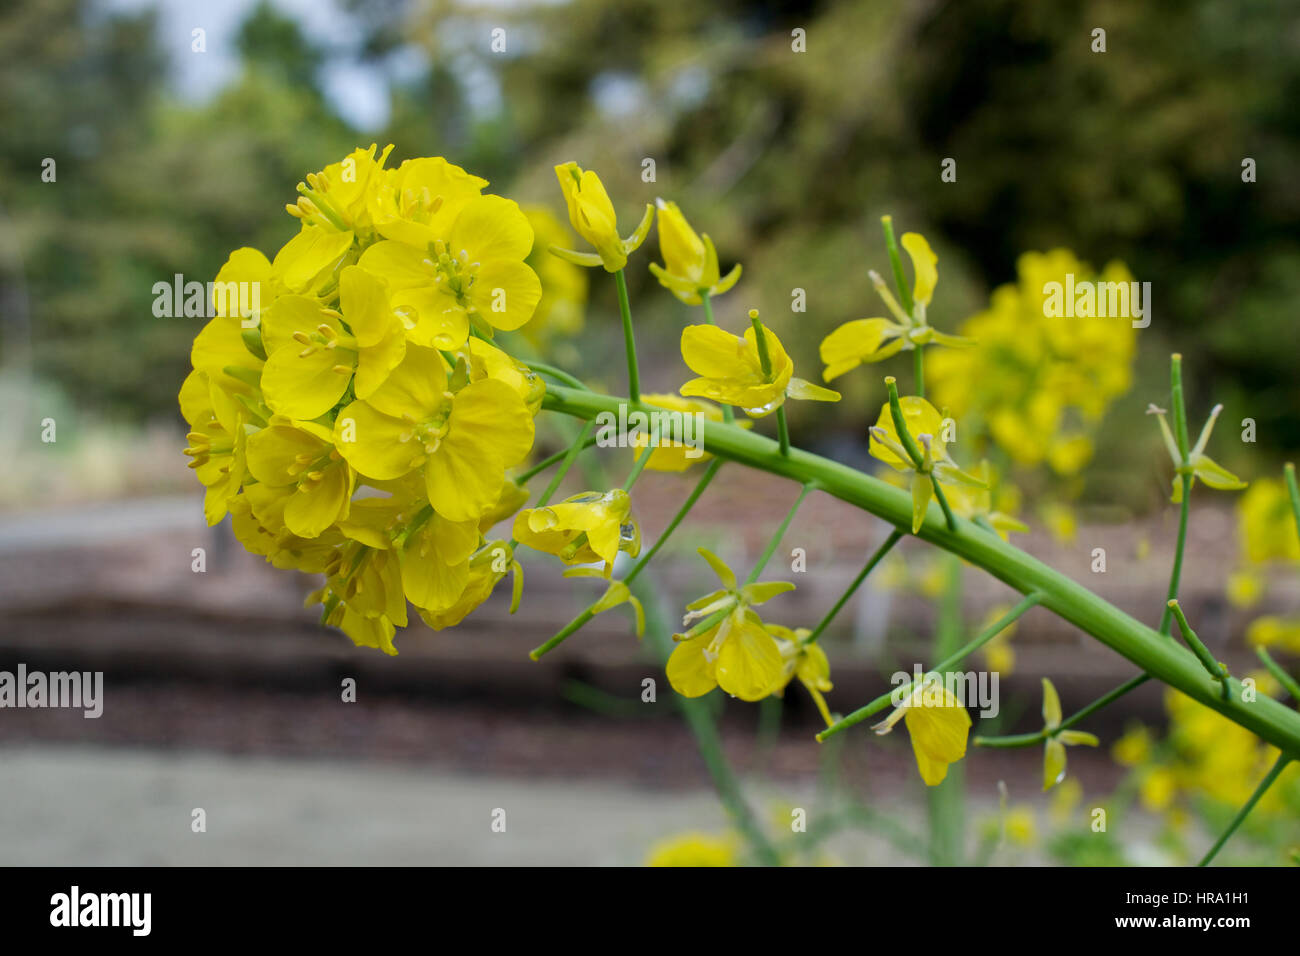 Yellow flowers of the invasive mustard plant in California, Brassica sp.,  in nature Stock Photo